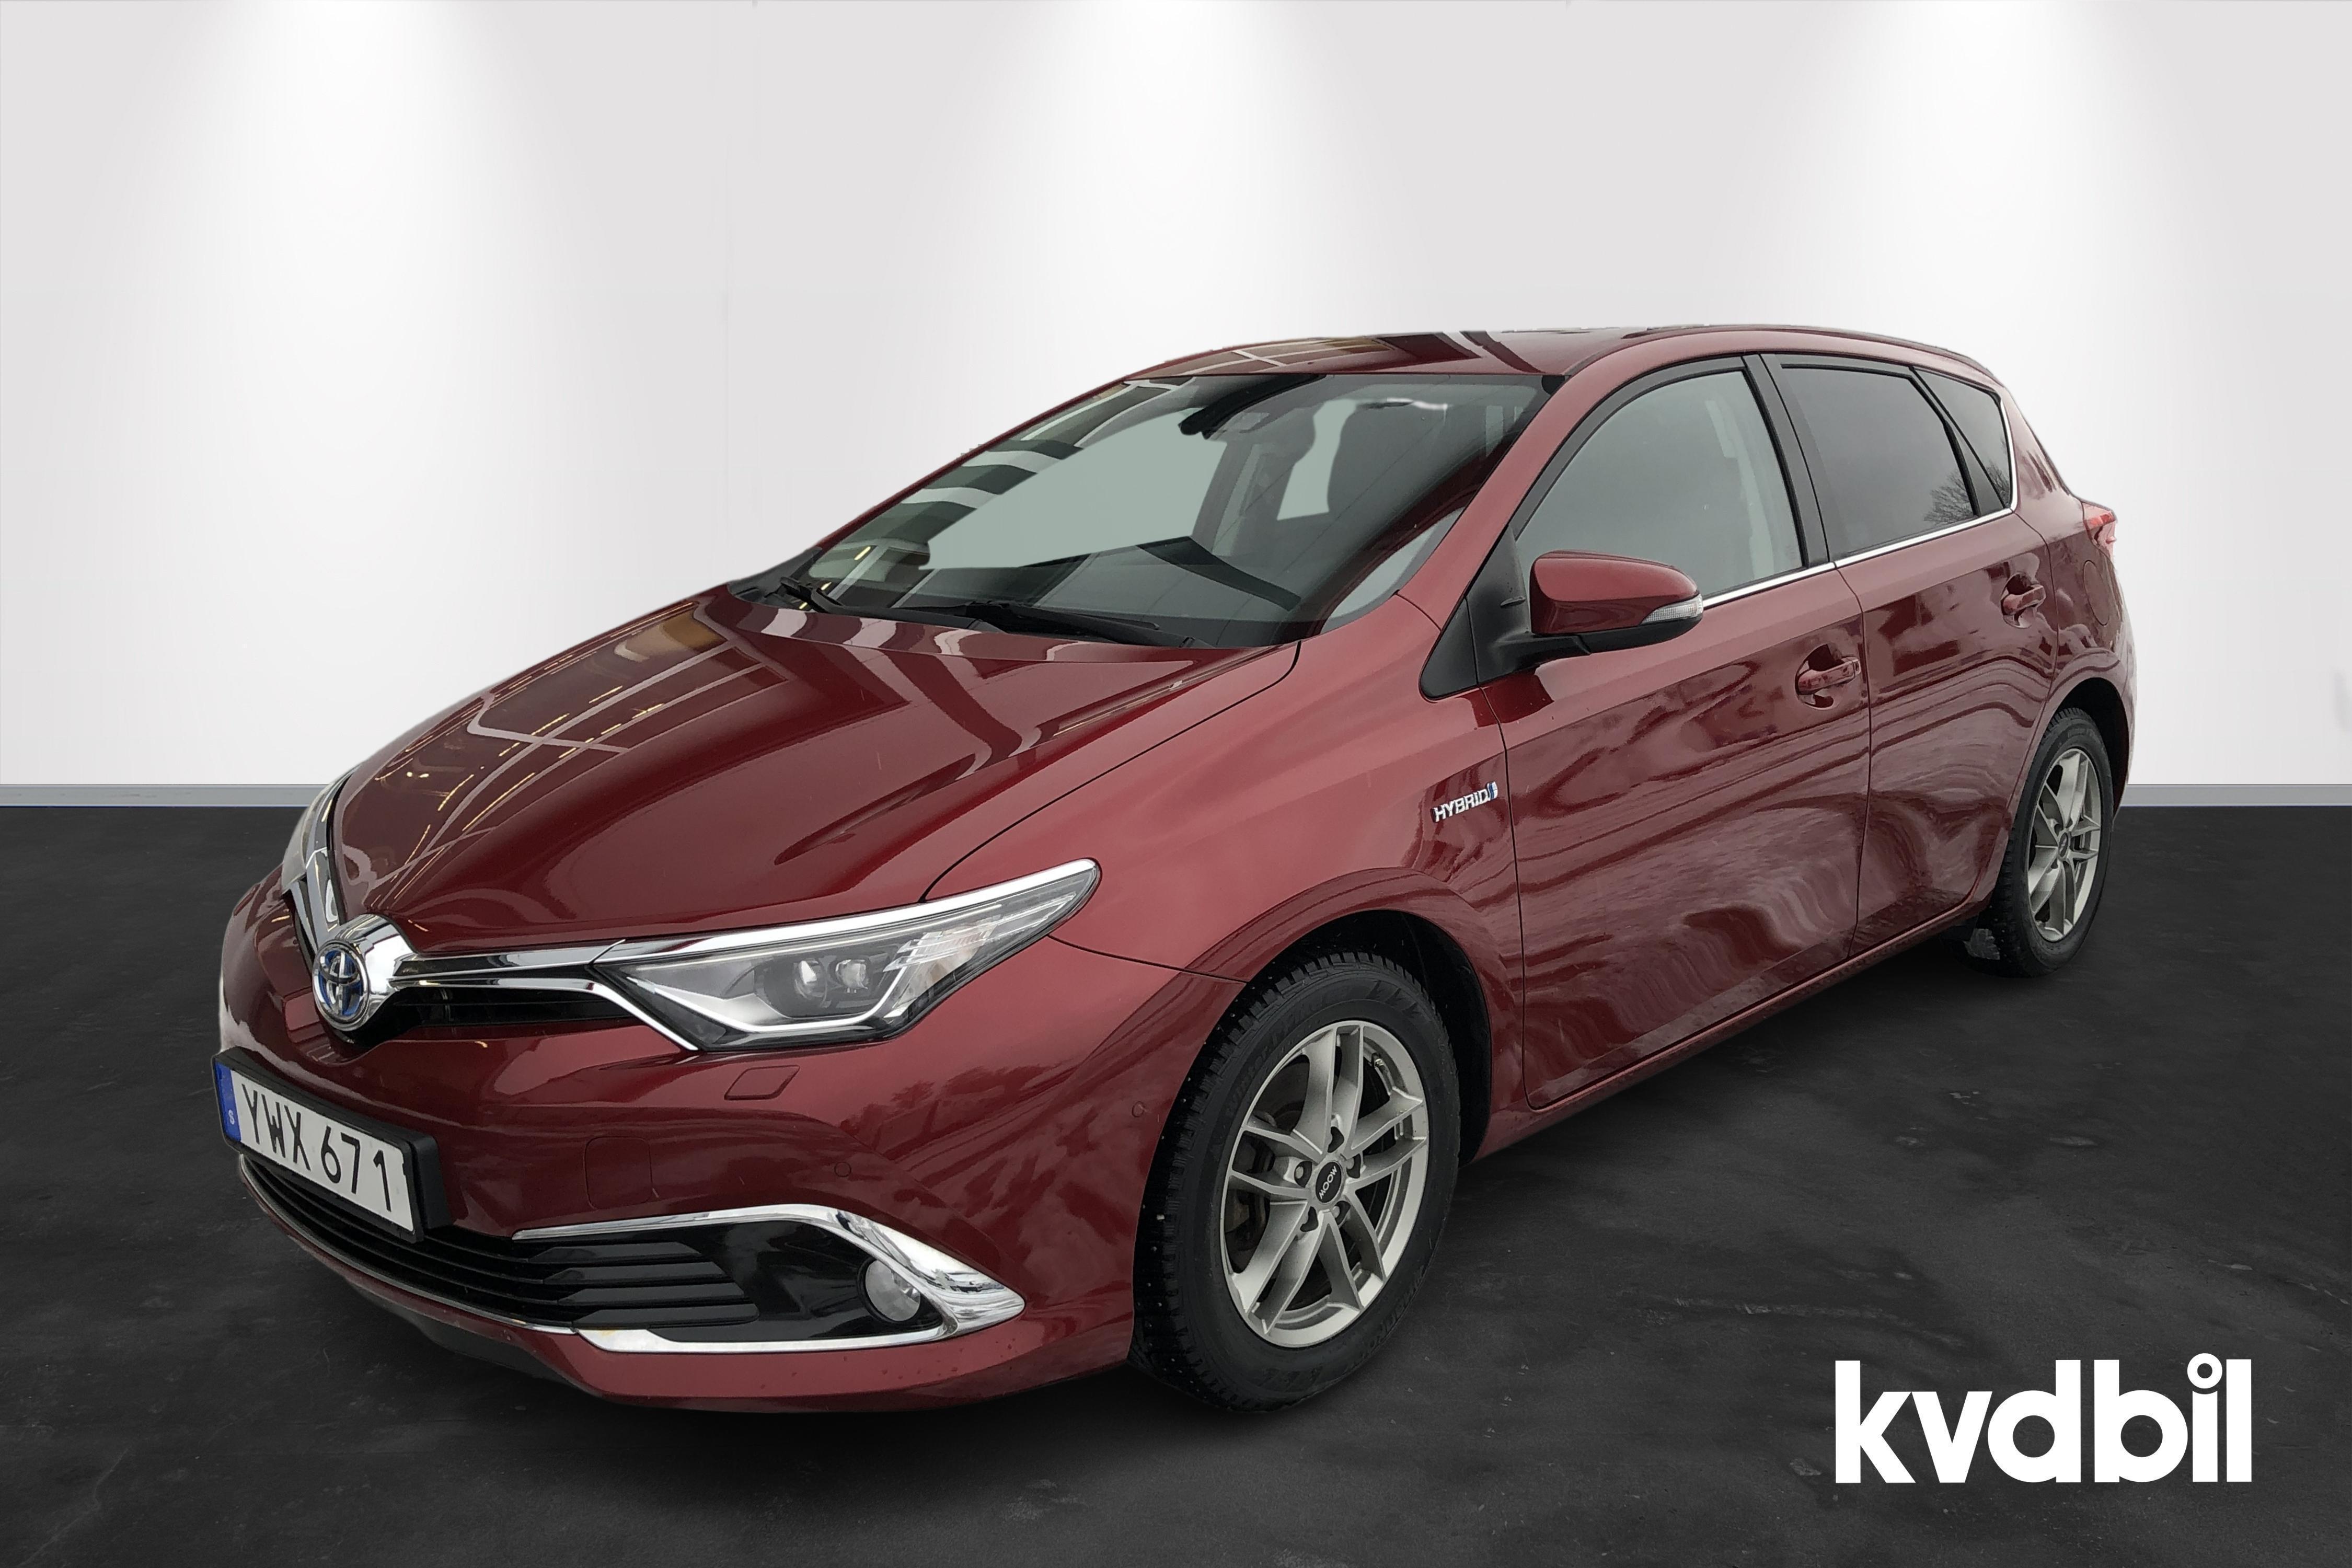 Toyota Auris 1.8 HSD 5dr (99hk) - 101 210 km - Automatic - red - 2018